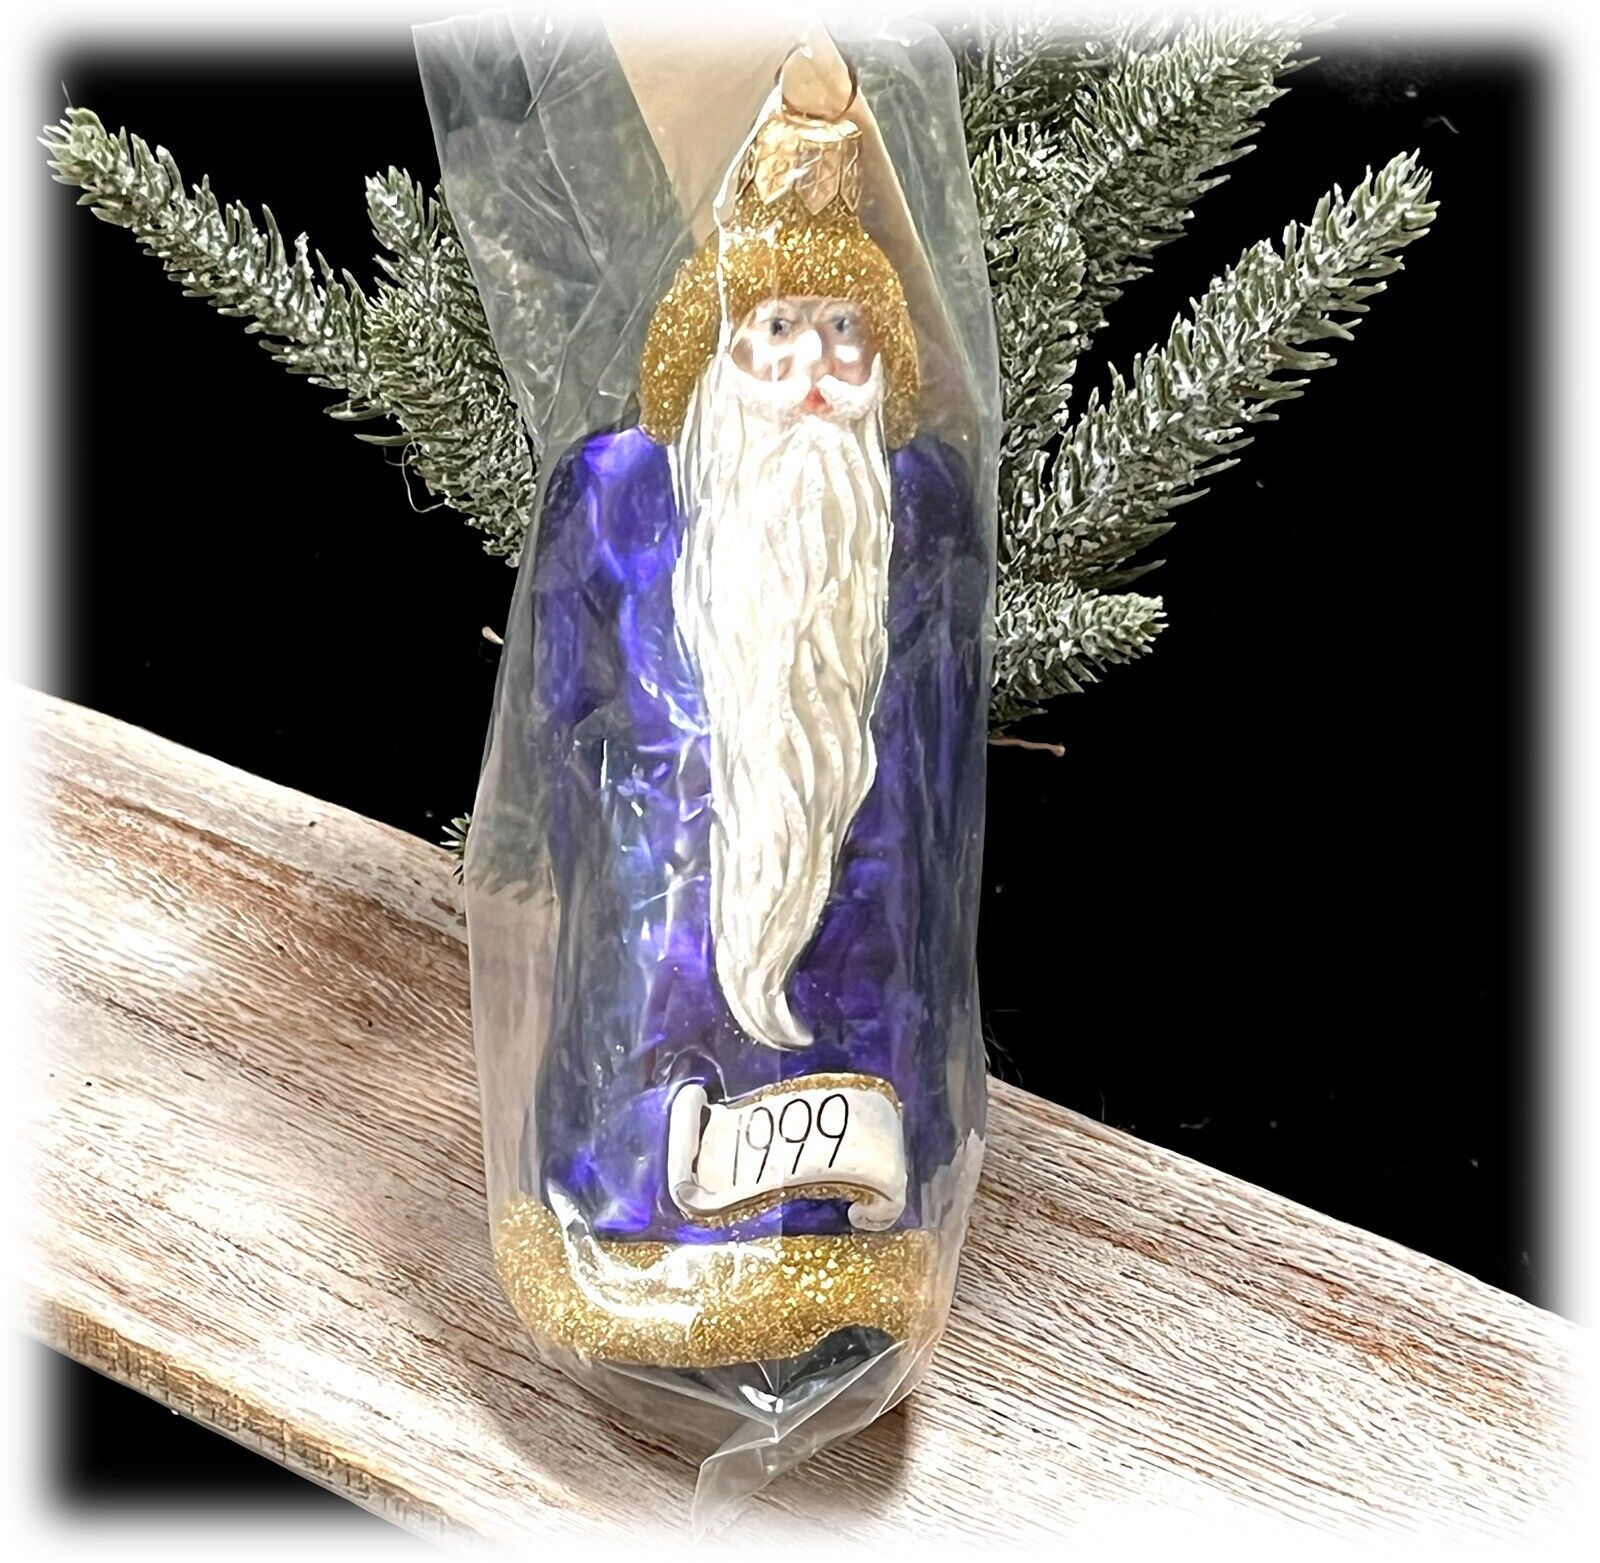 Vintage PATRICIA BREEN ORNAMENT Father Time Out with the Old, Sealed in Package